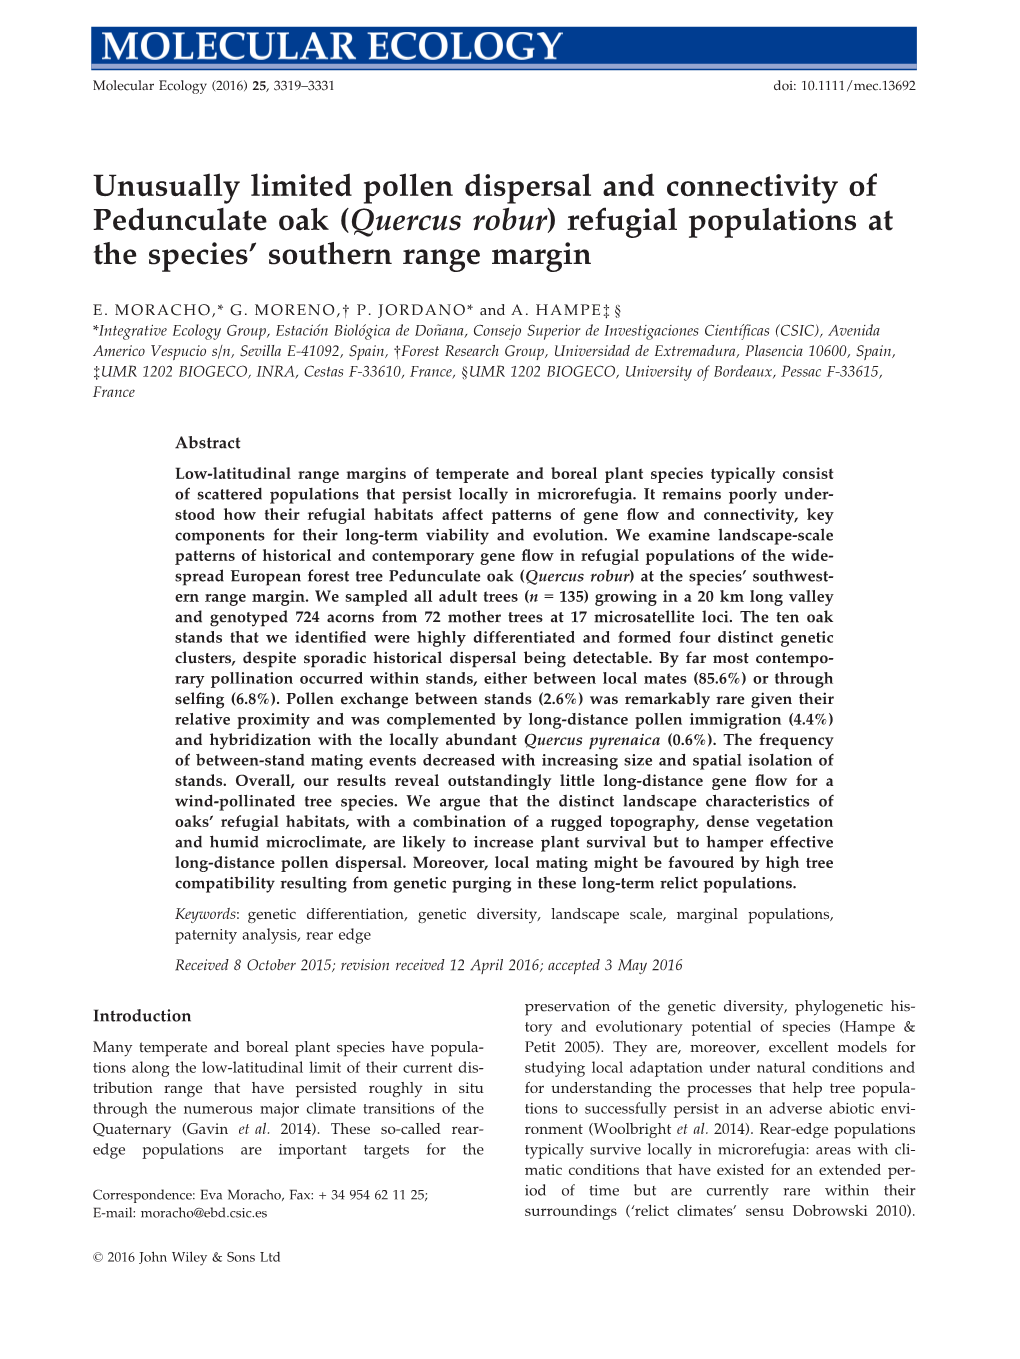 (Quercus Robur) Refugial Populations at the Species' Southern Range Margin